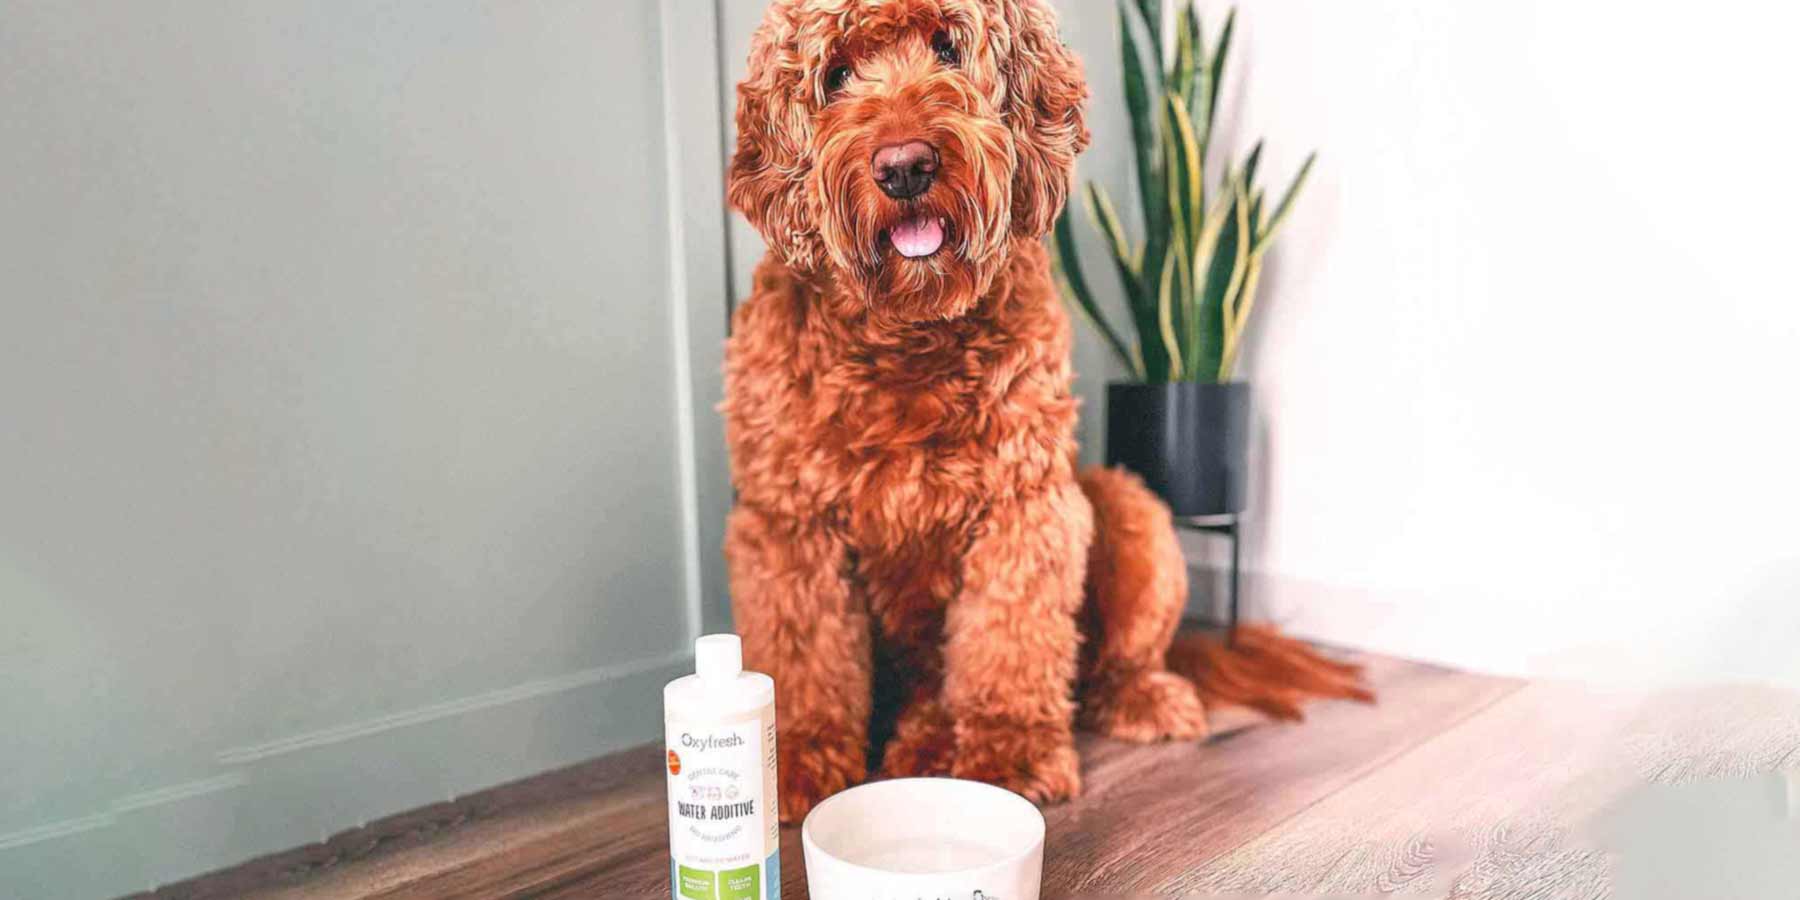 Social-Media-Post-From-Instagram-User-Fitz-The-Dood-cute-labradoodle-posing-next-to-a-bowl-full-of-water-with-oxyfresh-dental-water-additive-for-dogs-fresh-breath-and-healthy-teeth